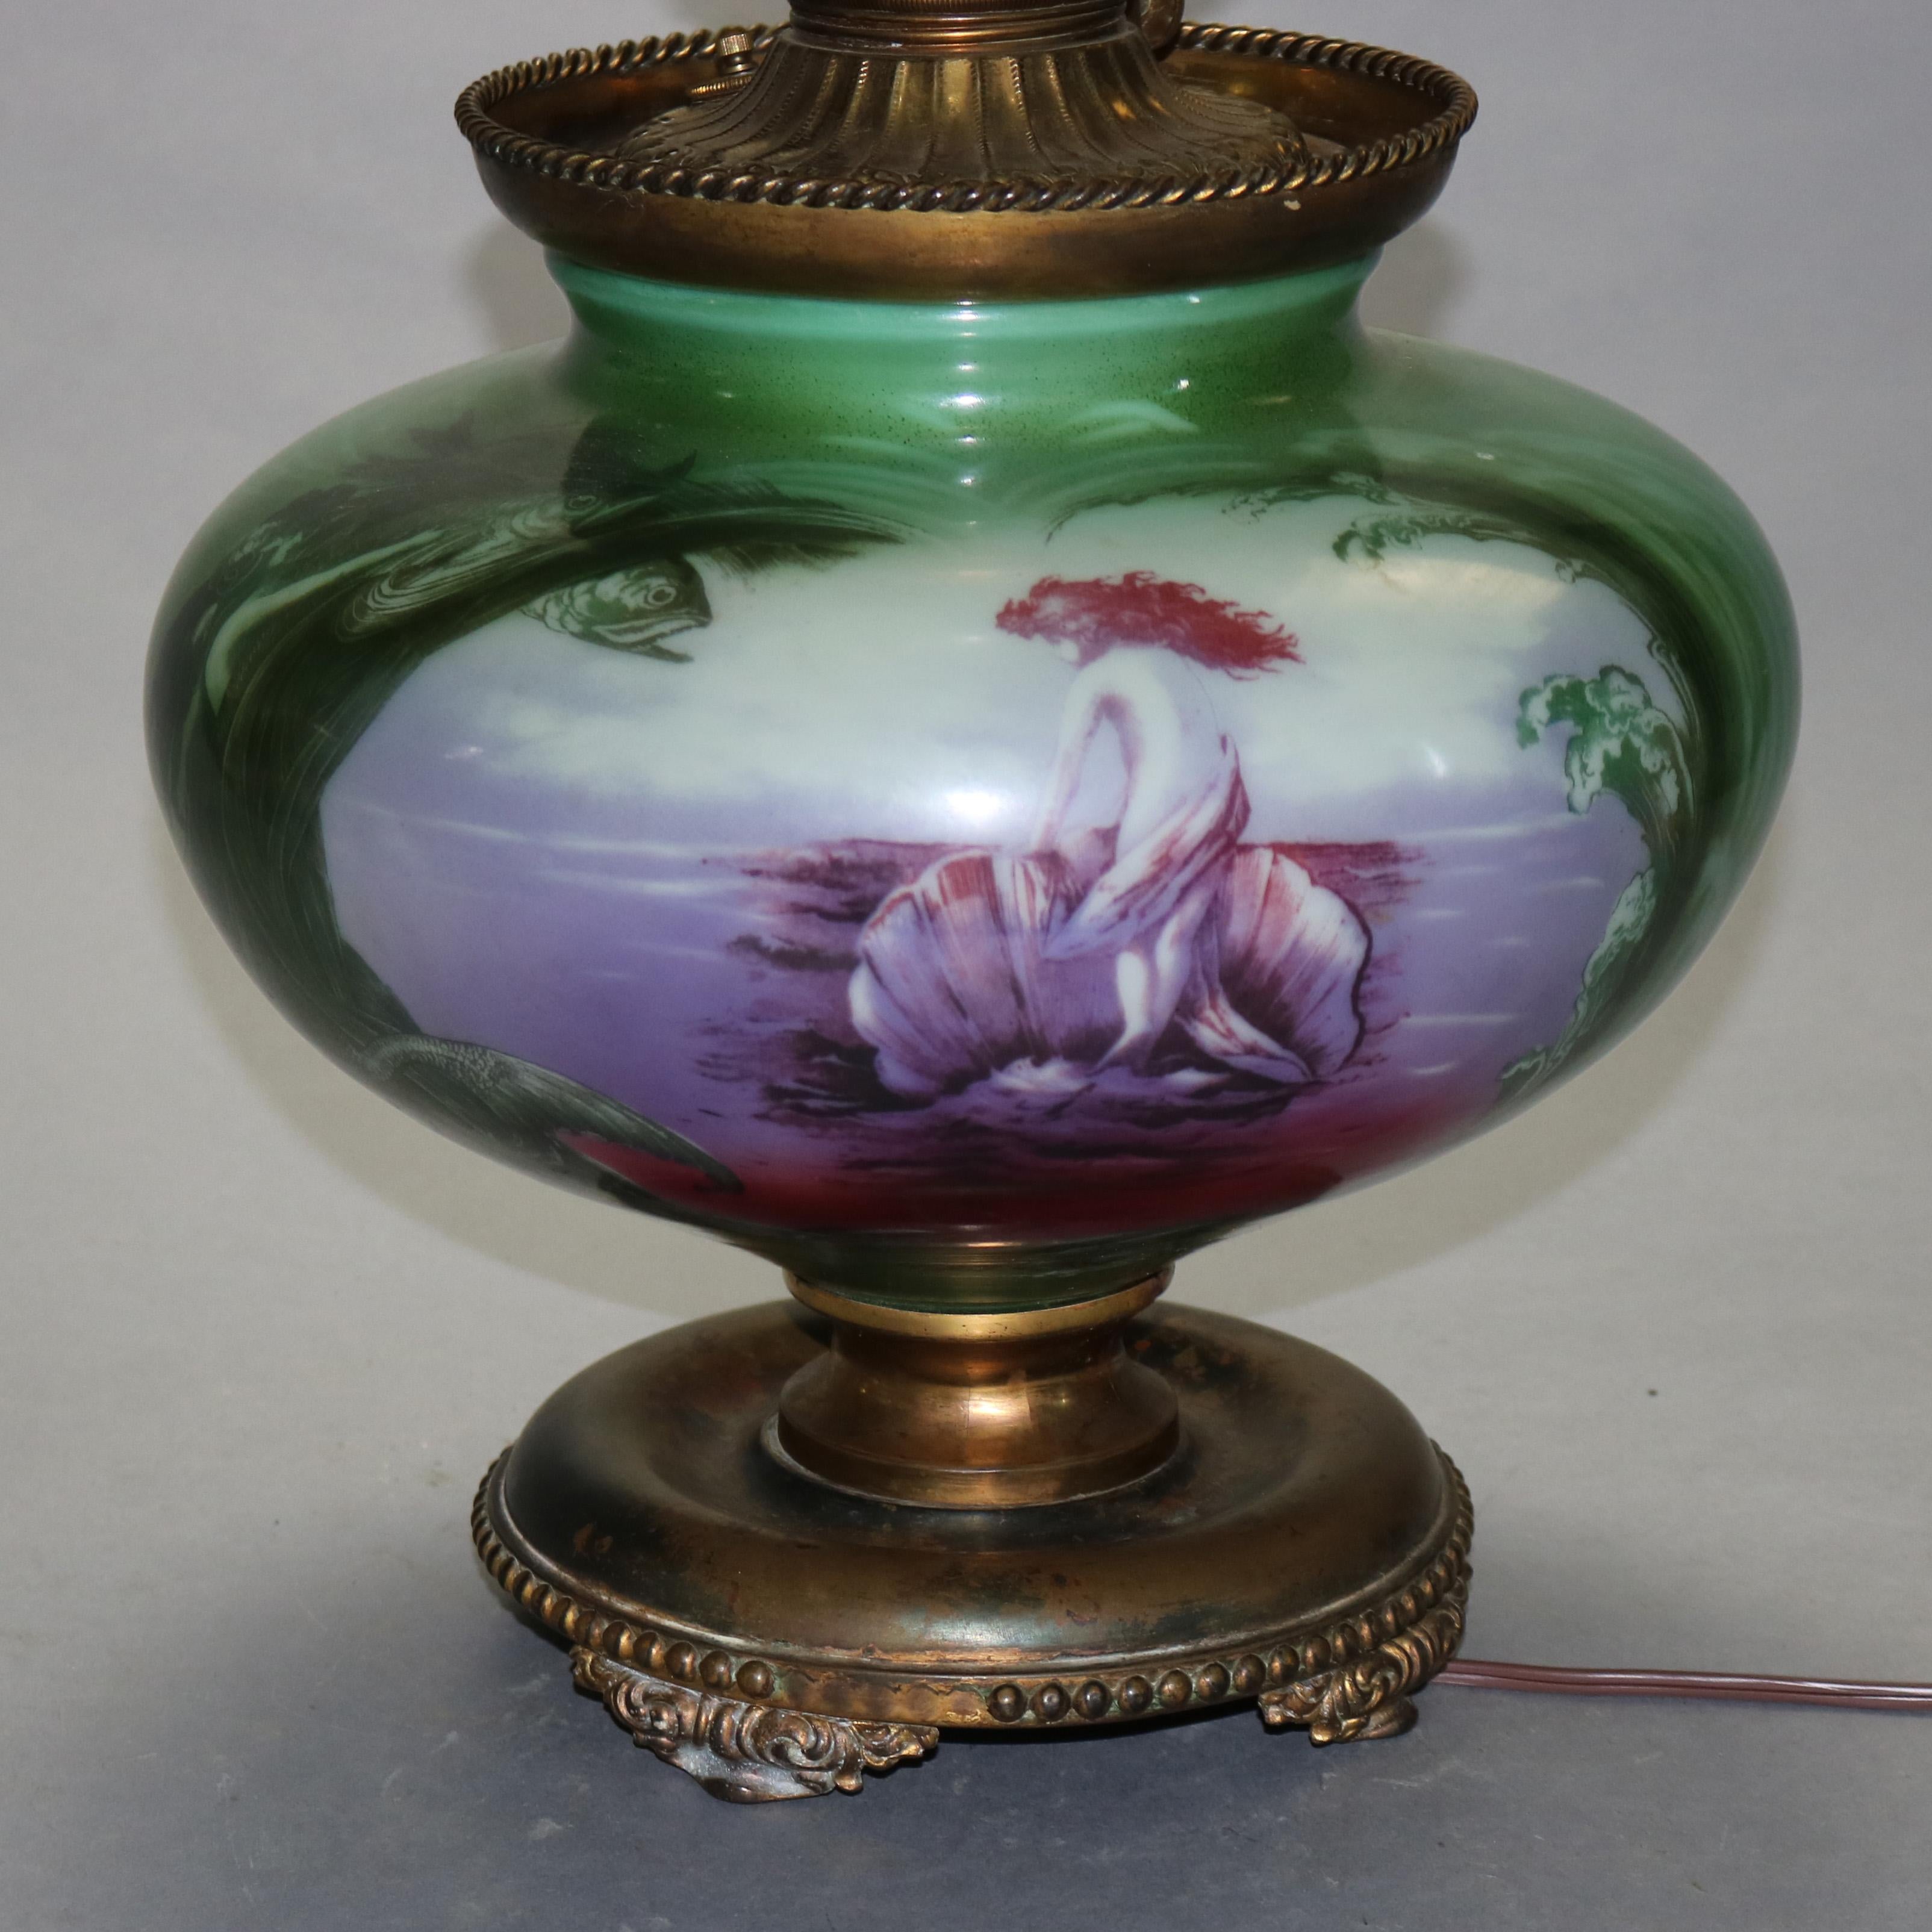 American Antique Oversized Gone with the Wind Lamp, Hand-Painted Scenic with Mermaid